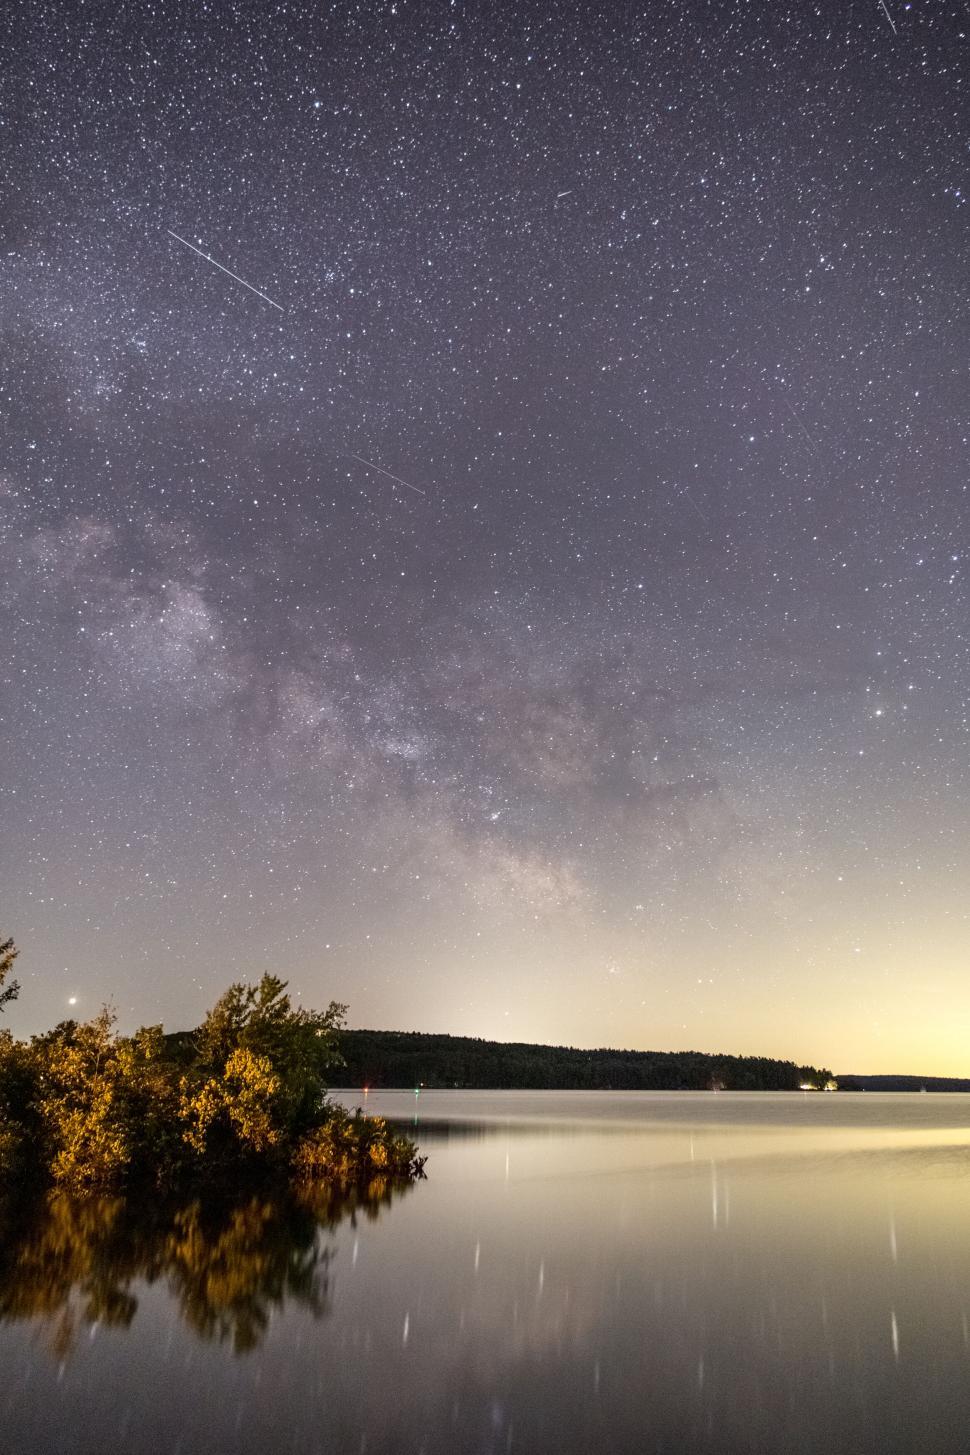 Free Image of Milky Way over a serene lake landscape 